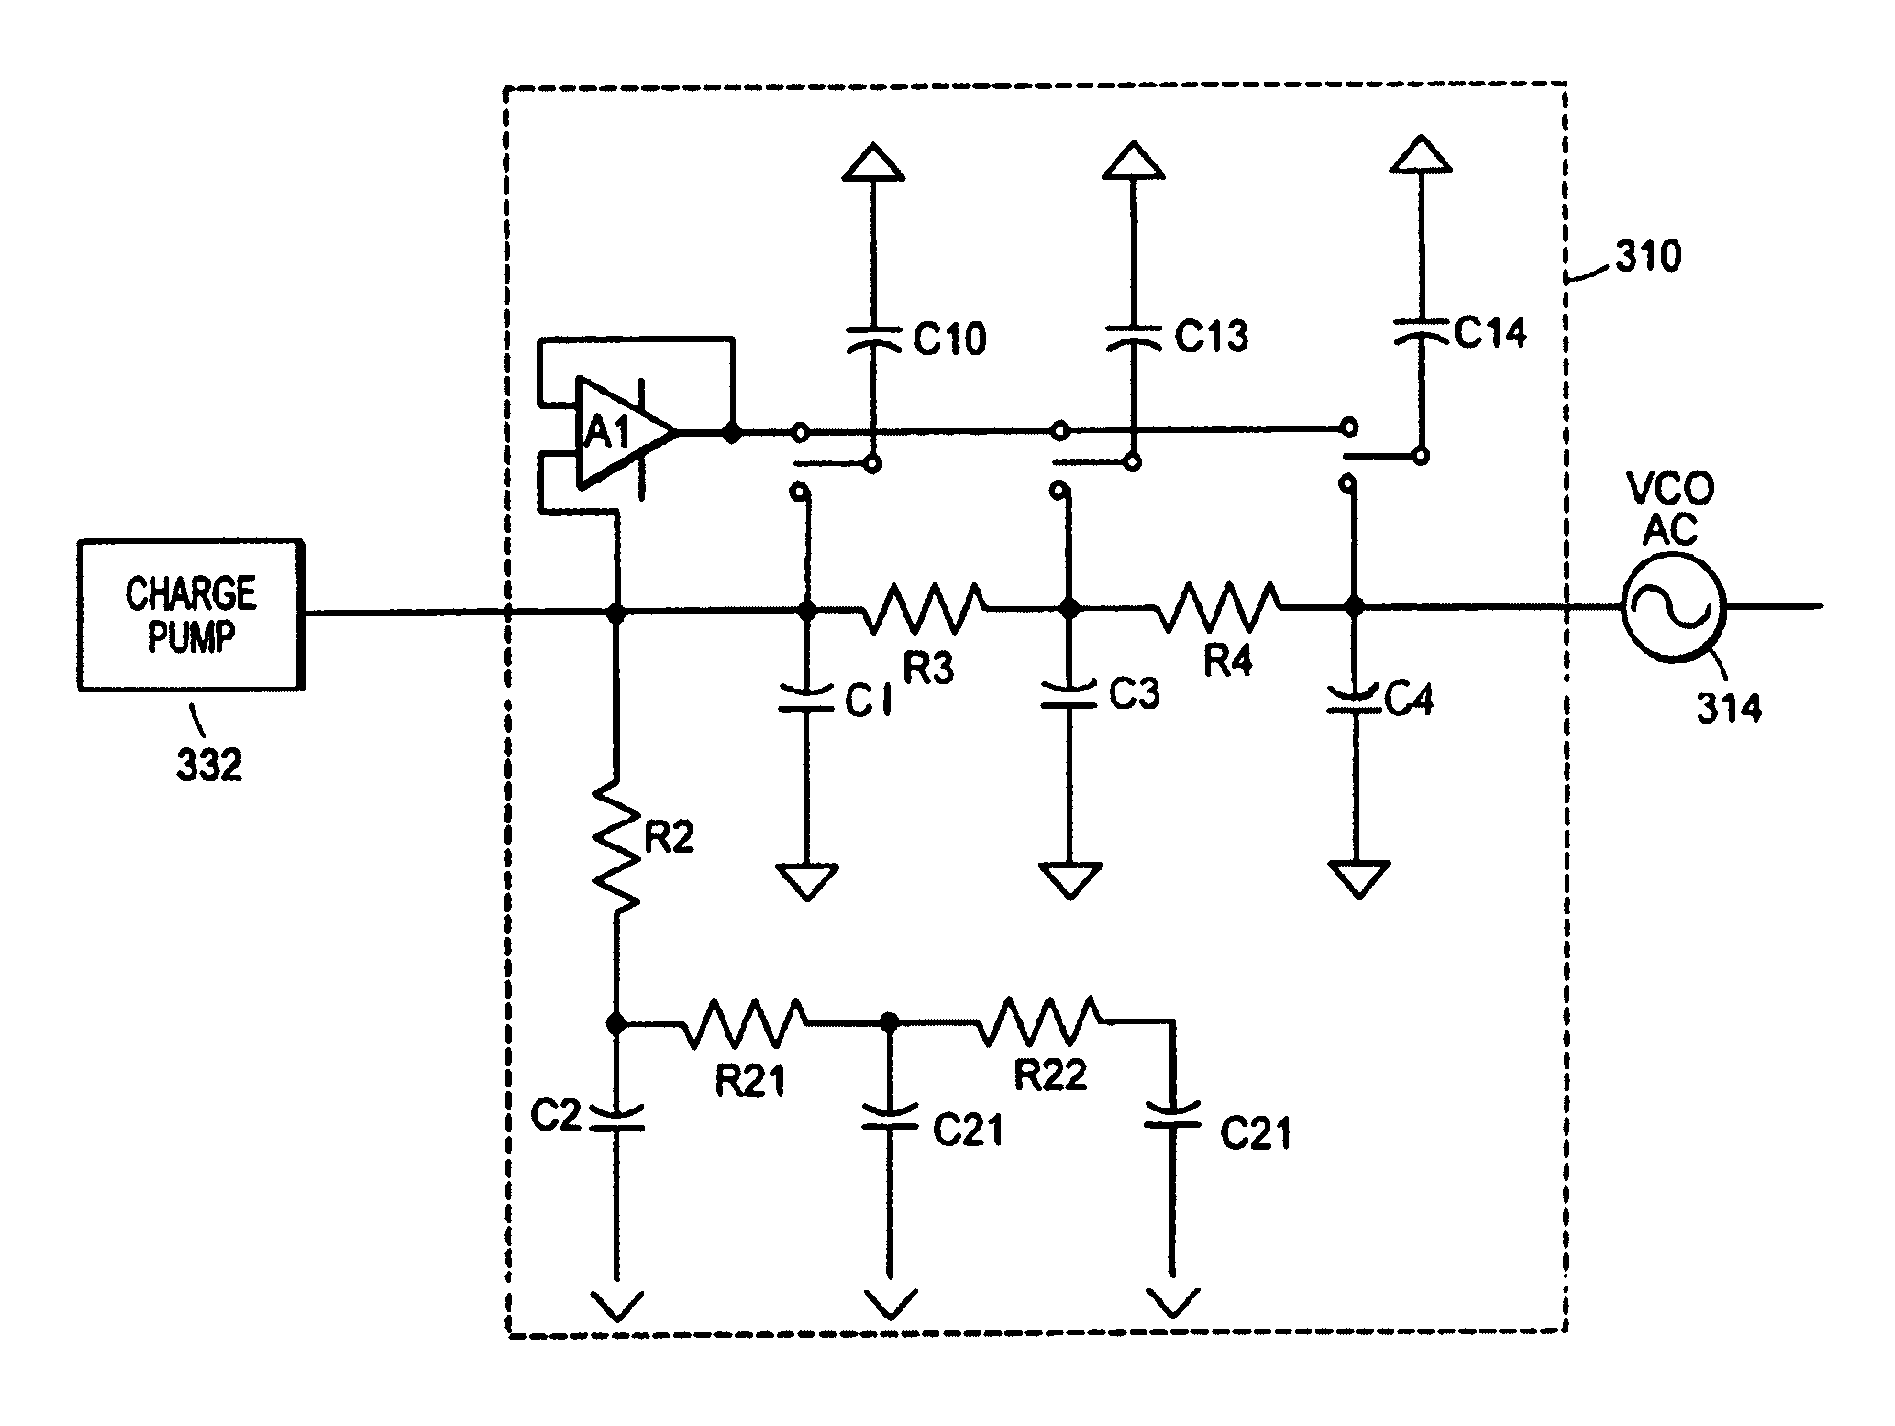 Phase-locked loop filter with out of band rejection in low bandwidth mode